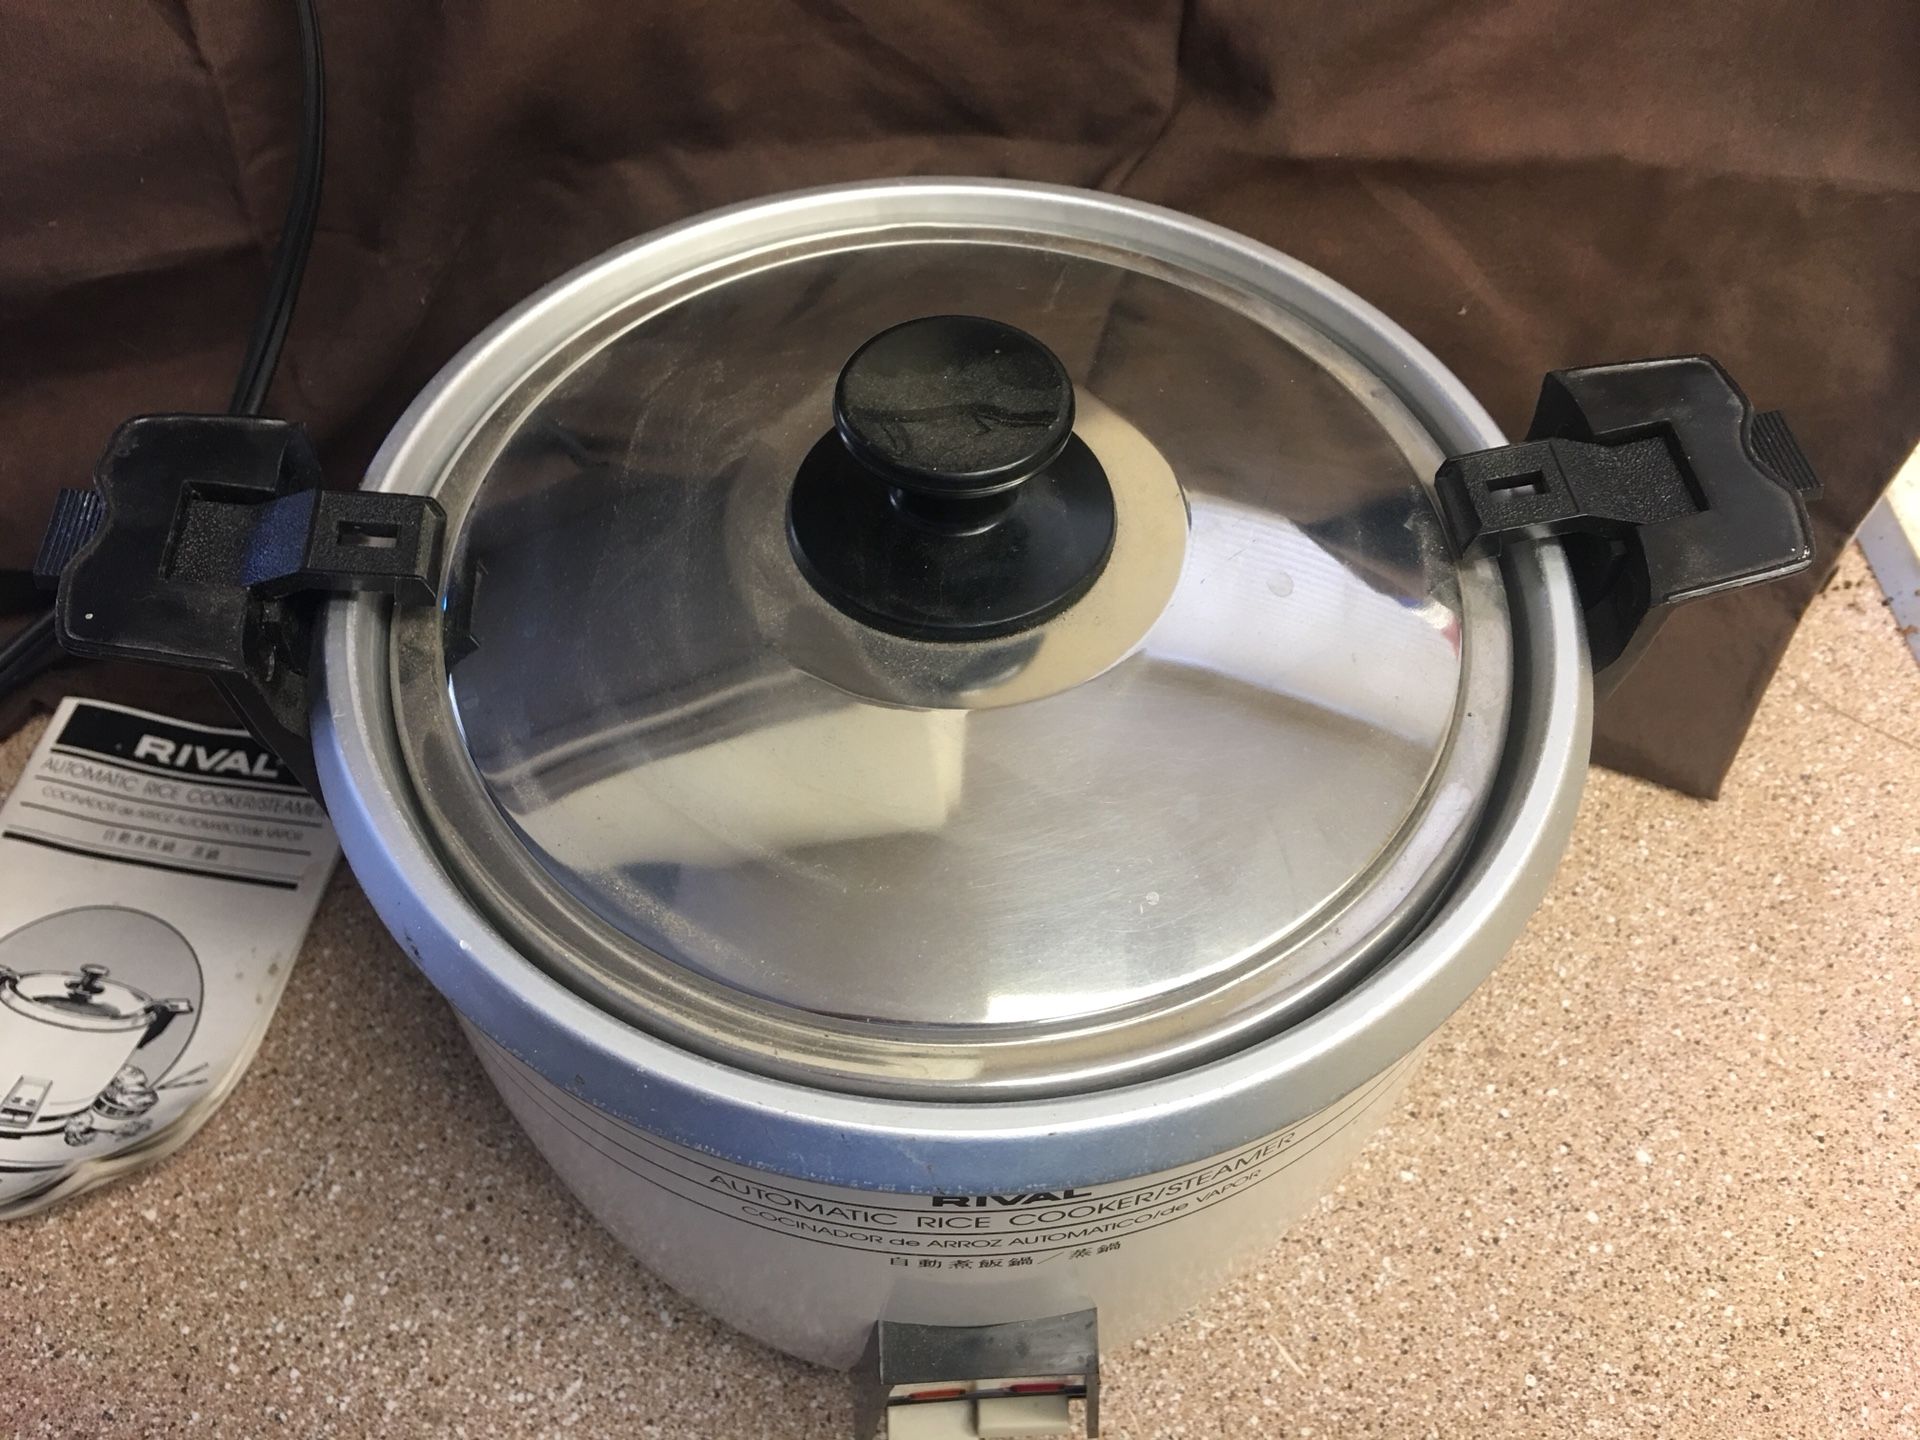 Aroma Professional Plus Rice Cooker Multicooker for Sale in Mooresville, NC  - OfferUp